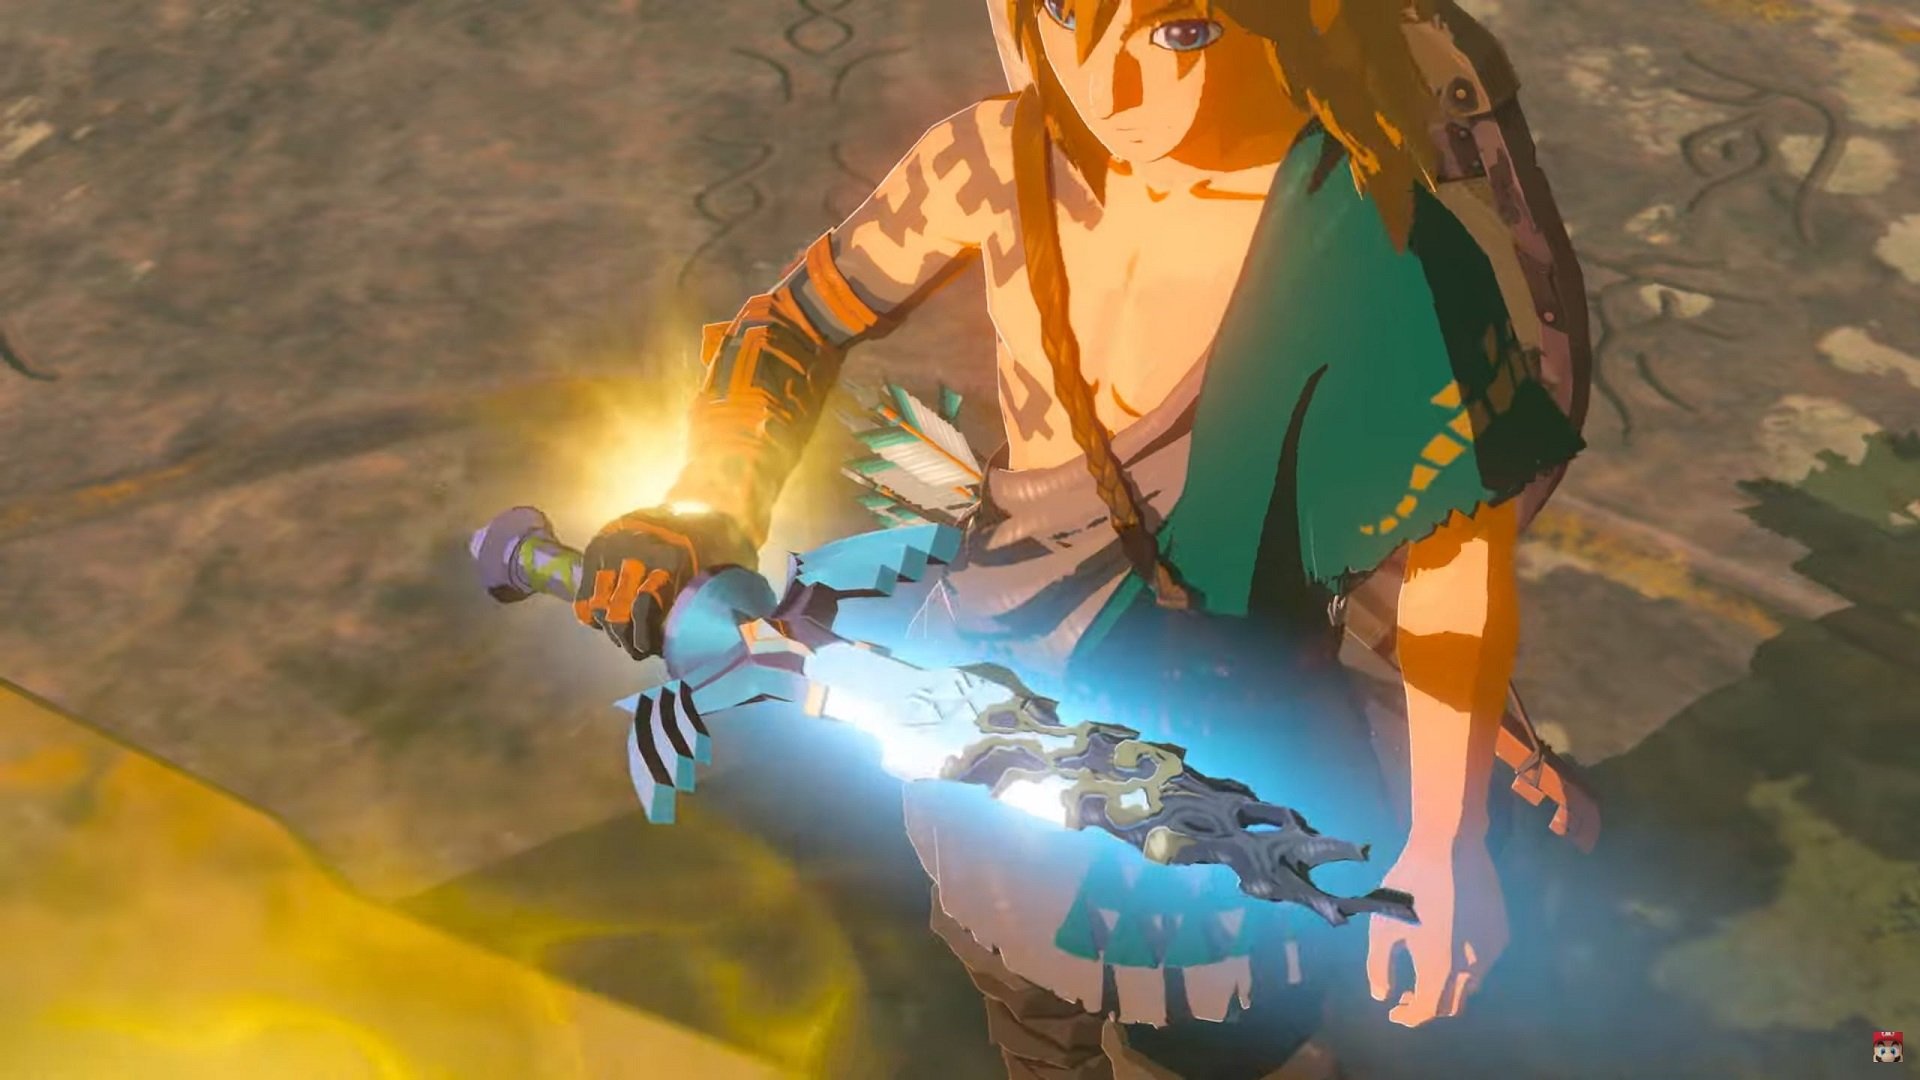 Link staring at a broken sword in the Breath of the Wild sequel